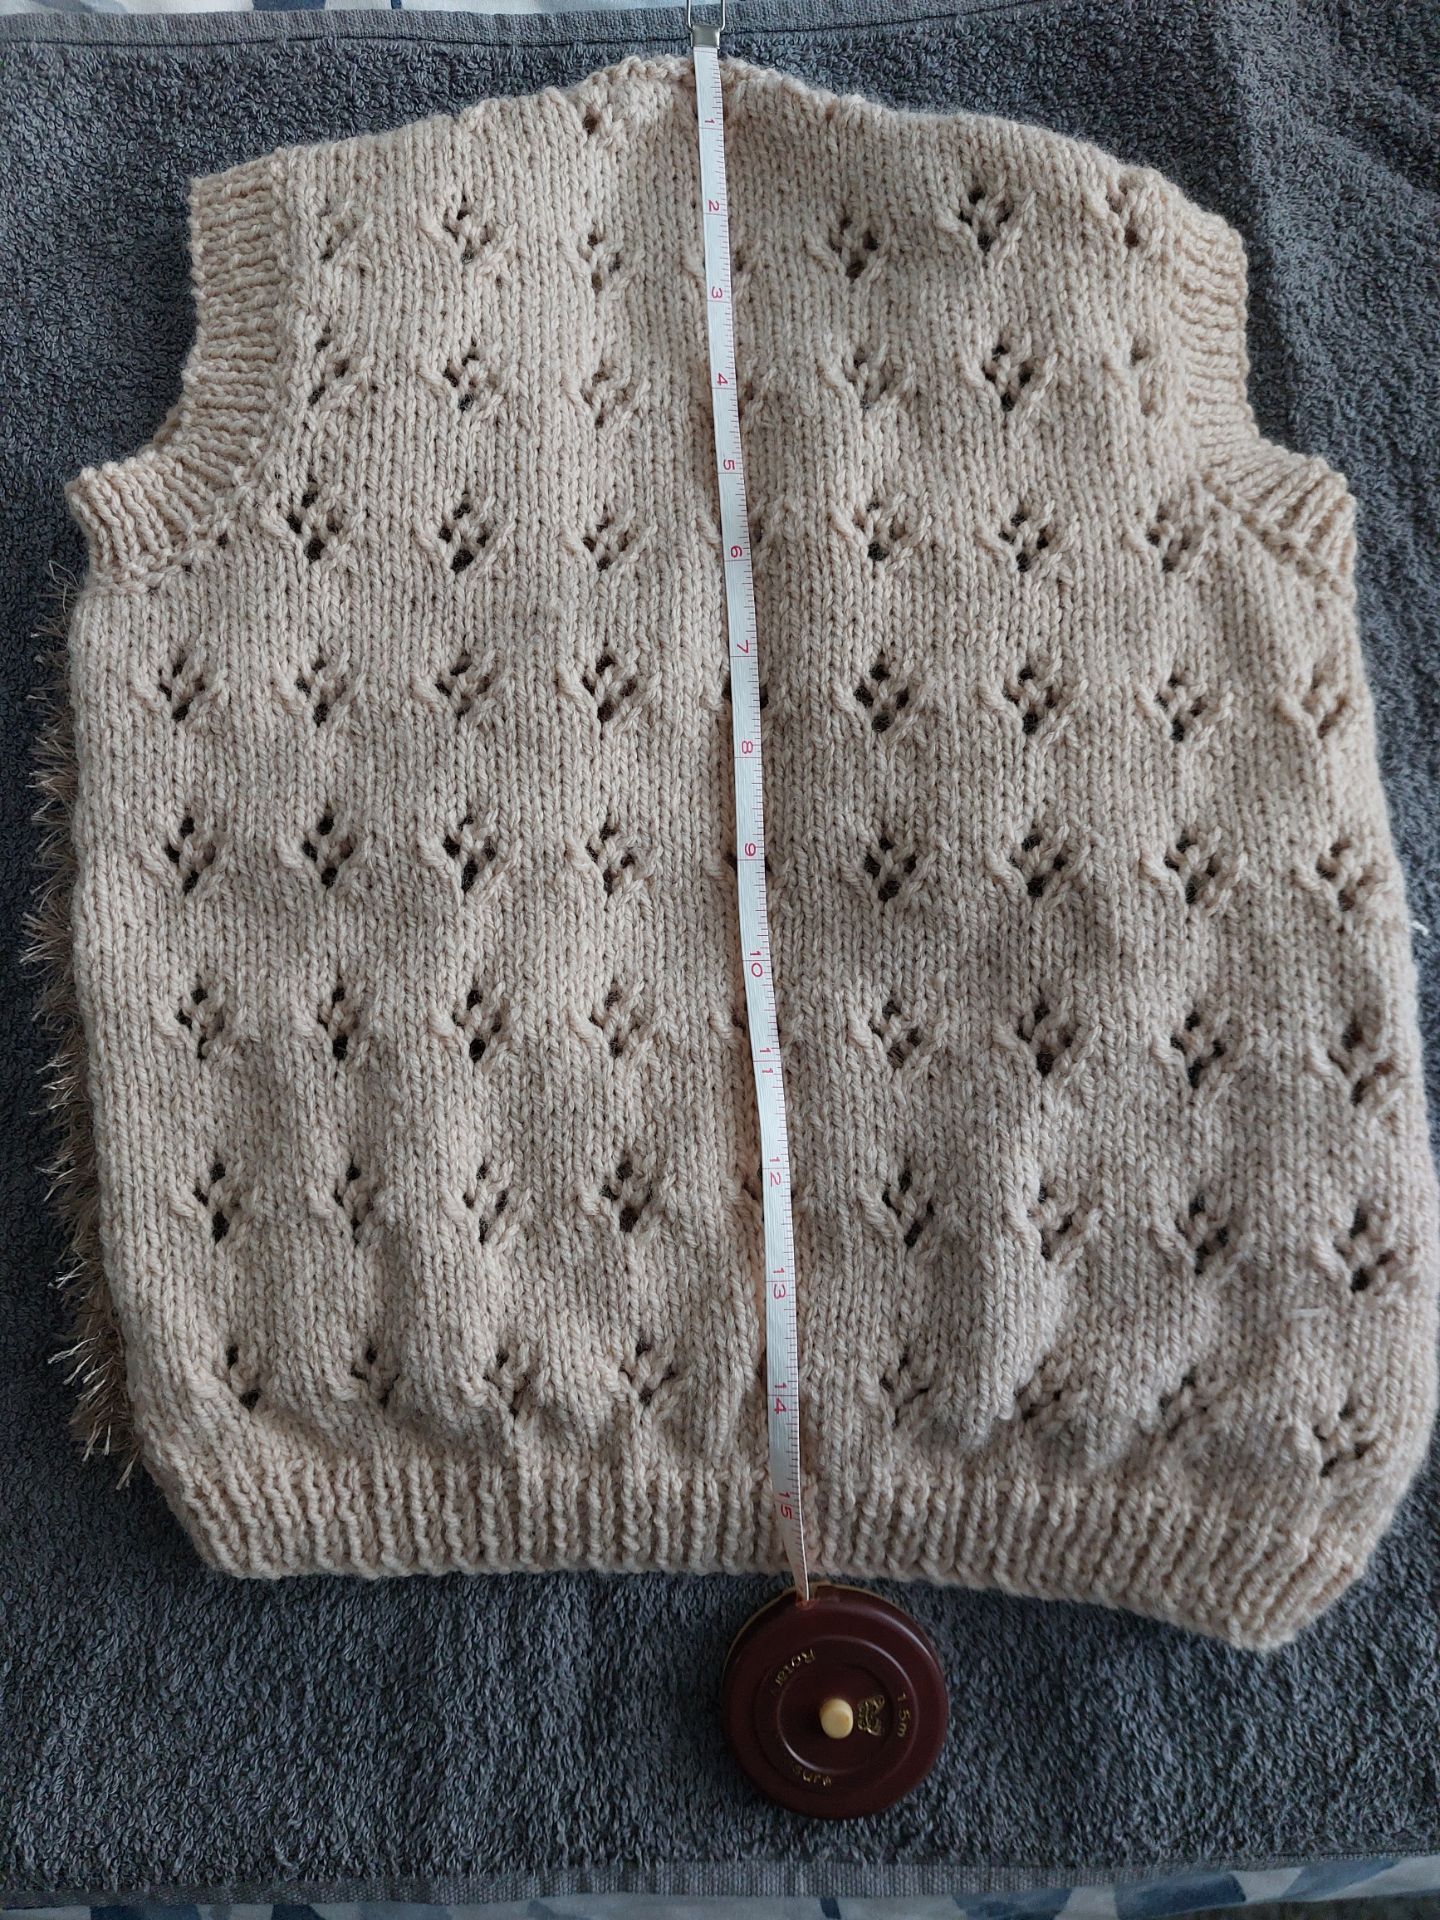 Hand Knitted Gilet - Image 2 of 3